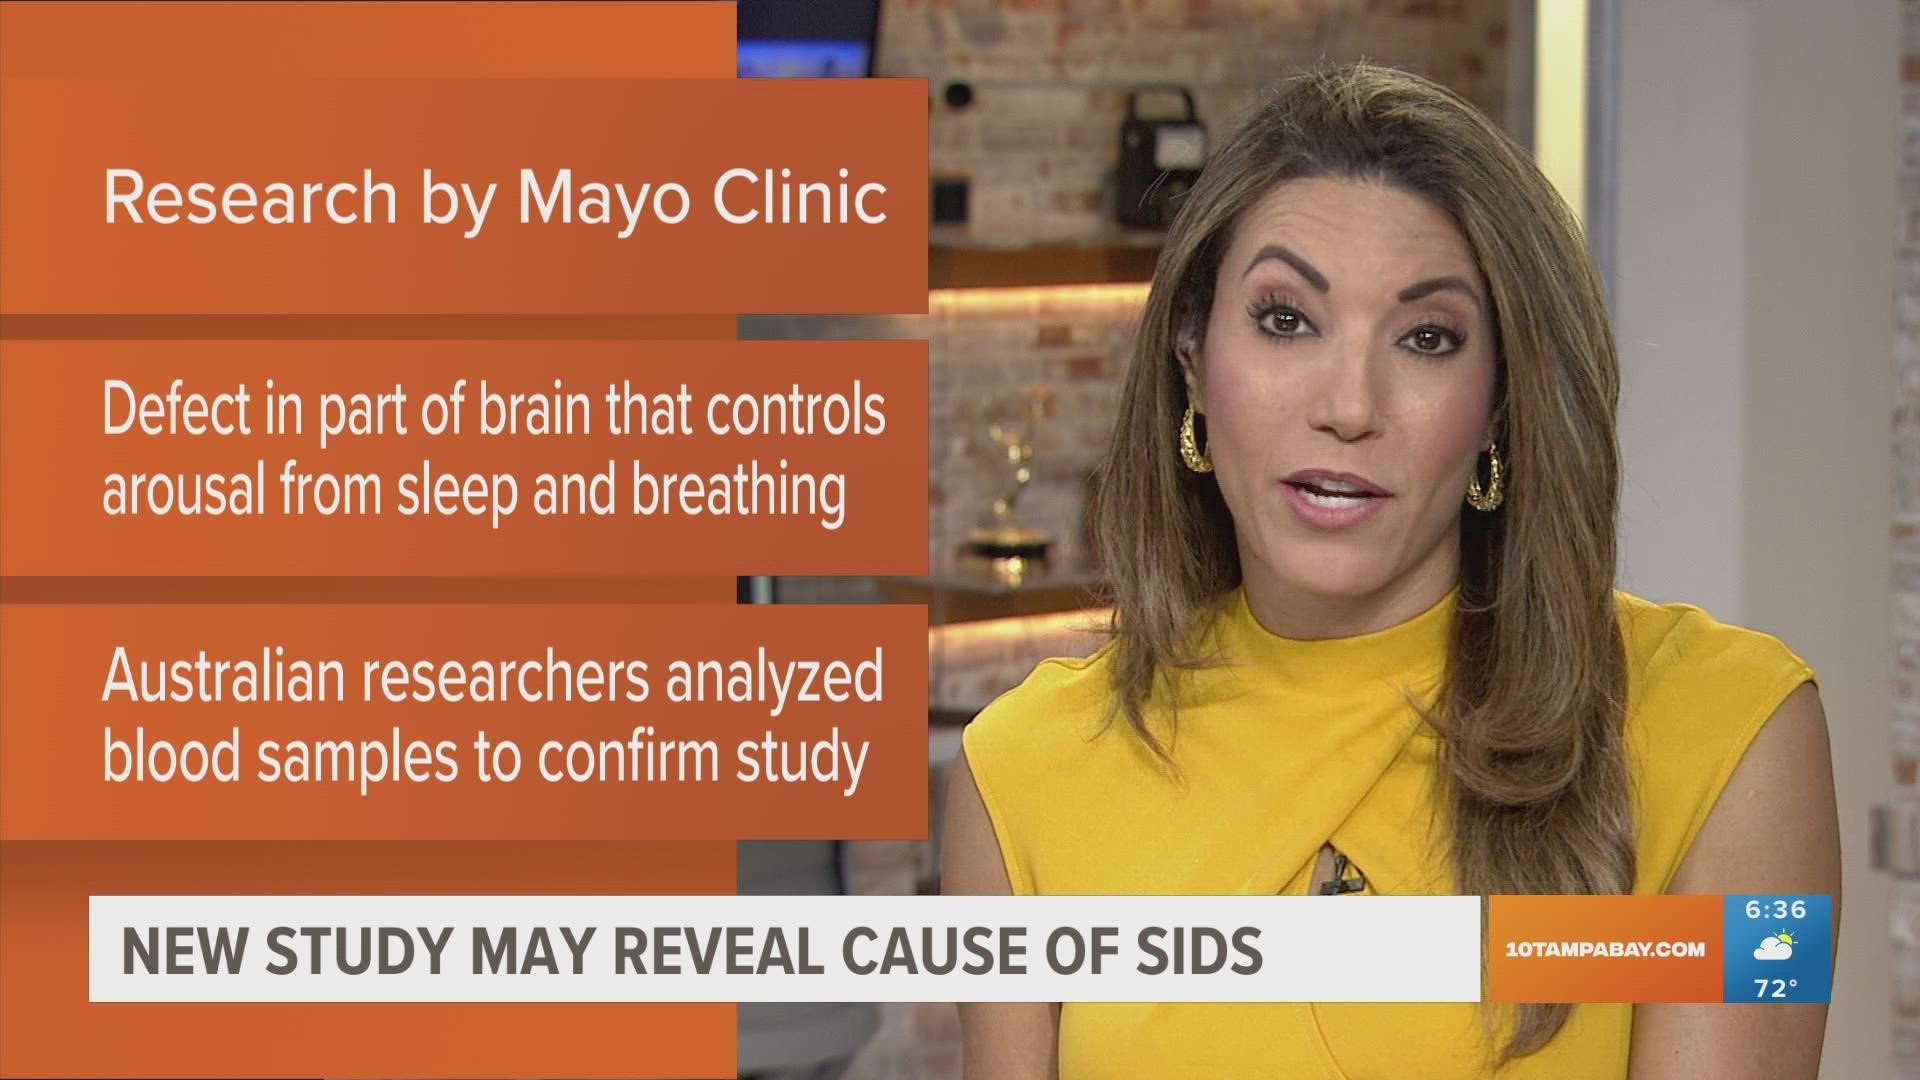 Sudden infant death syndrome, or SIDS, usually happens when infants die in their sleep without any particular reason. Researchers say they now know a cause.